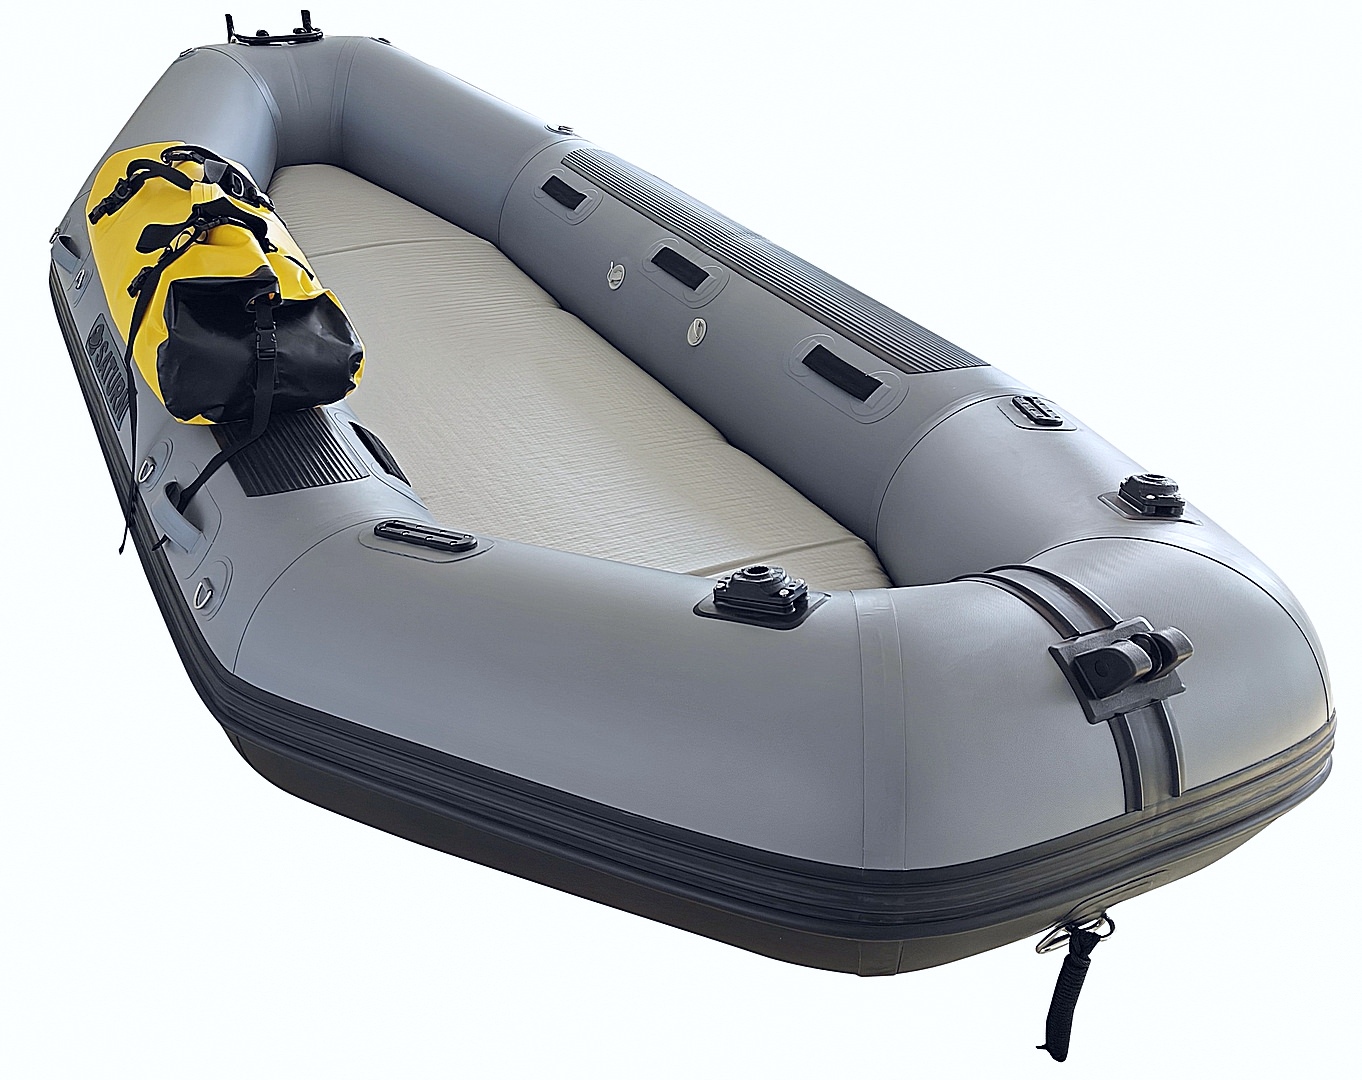 Scotty Side/Deck Mount - AIRE Rafts